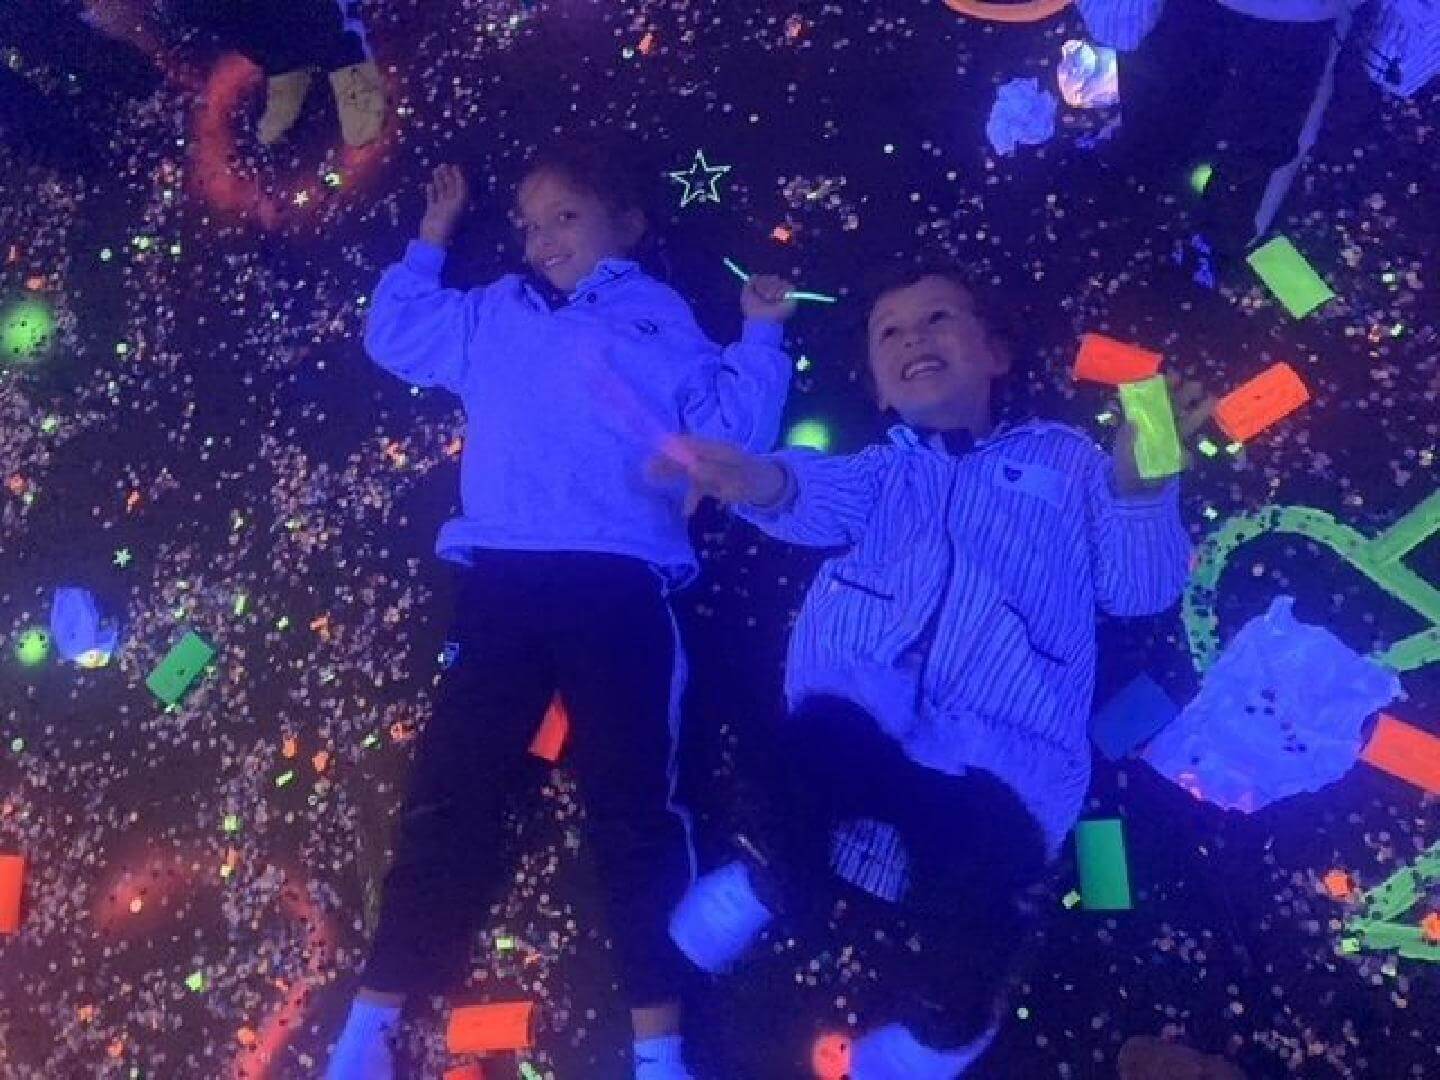 We travel into space in our Sensory Room